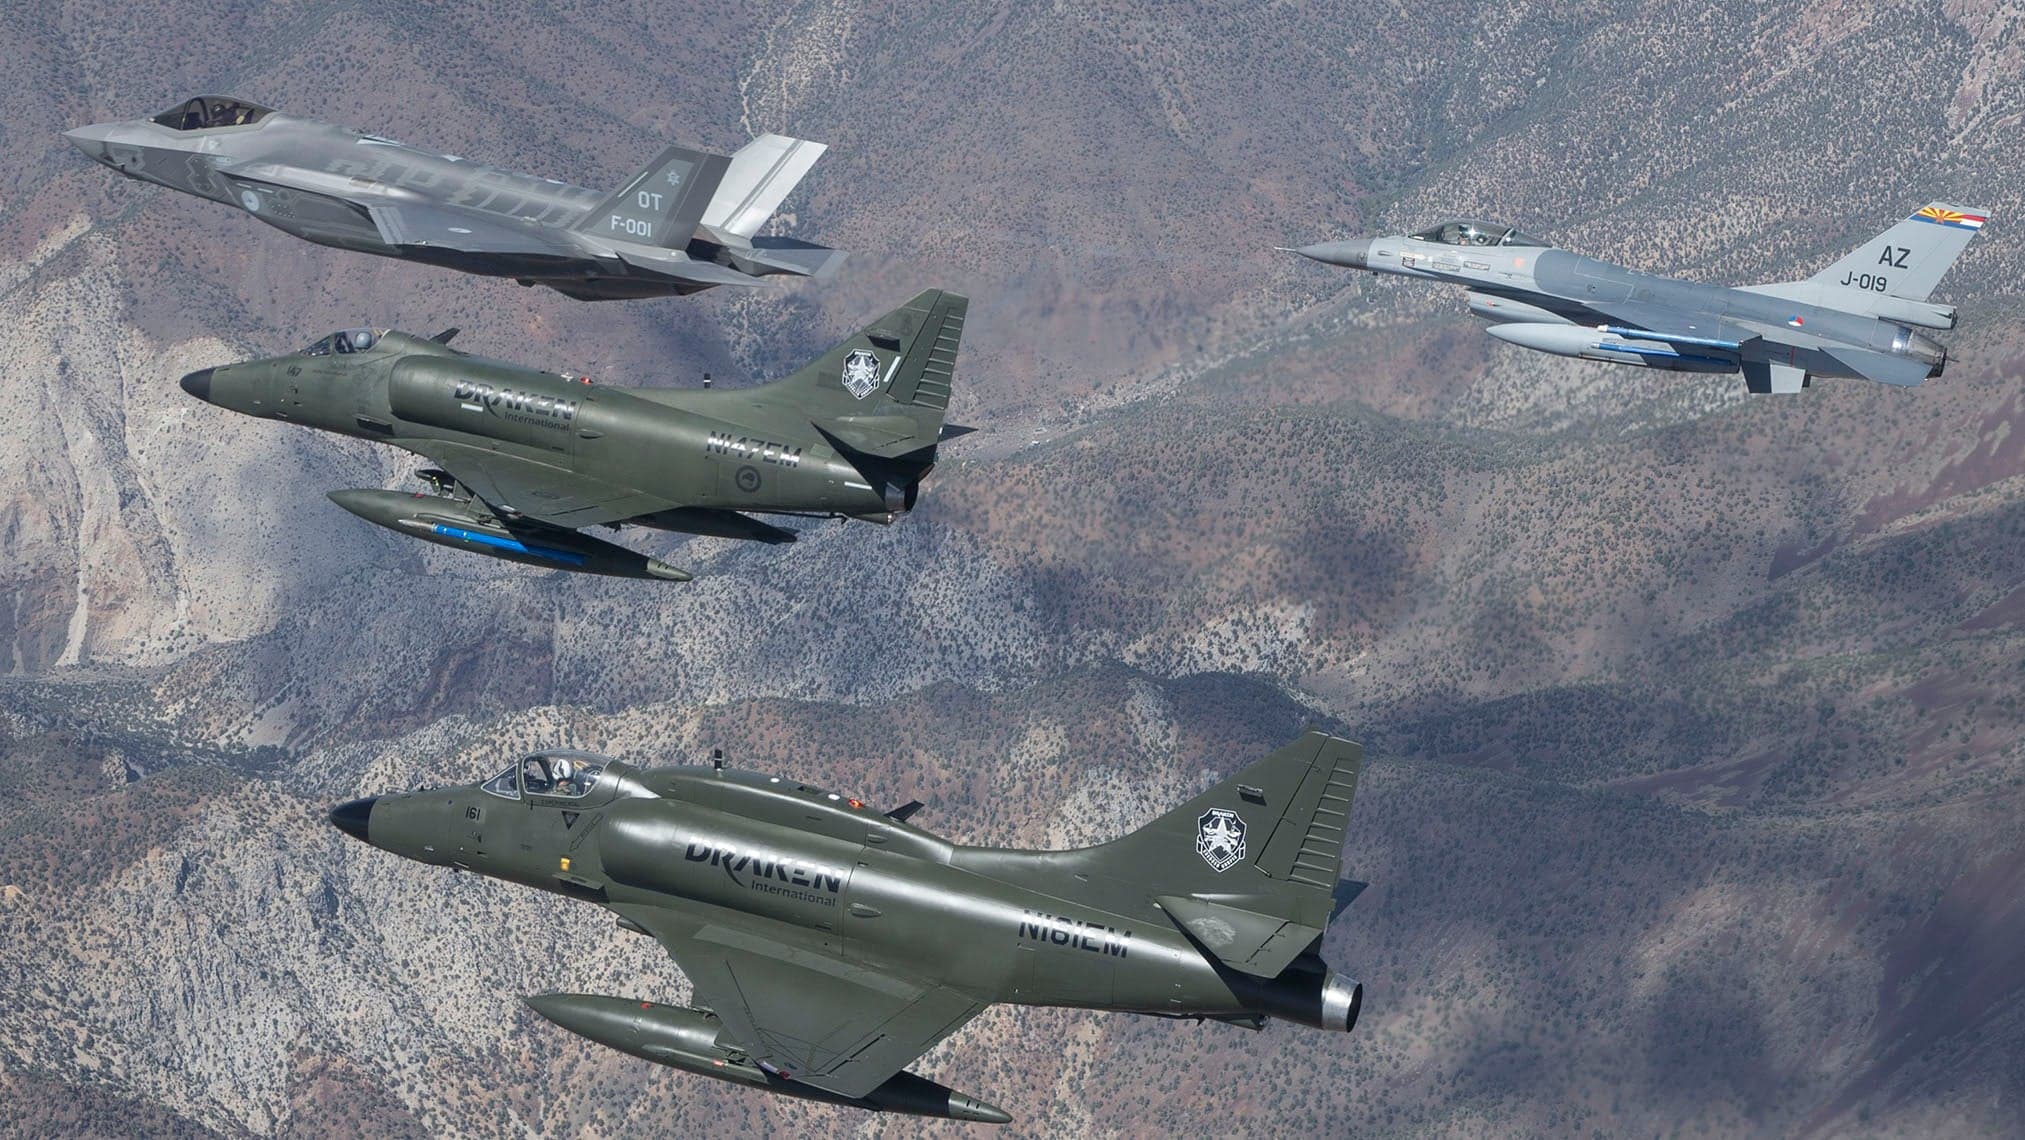 Draken Becomes The Next Red Air Private Contractor To Acquire F-16 Fighter Jets